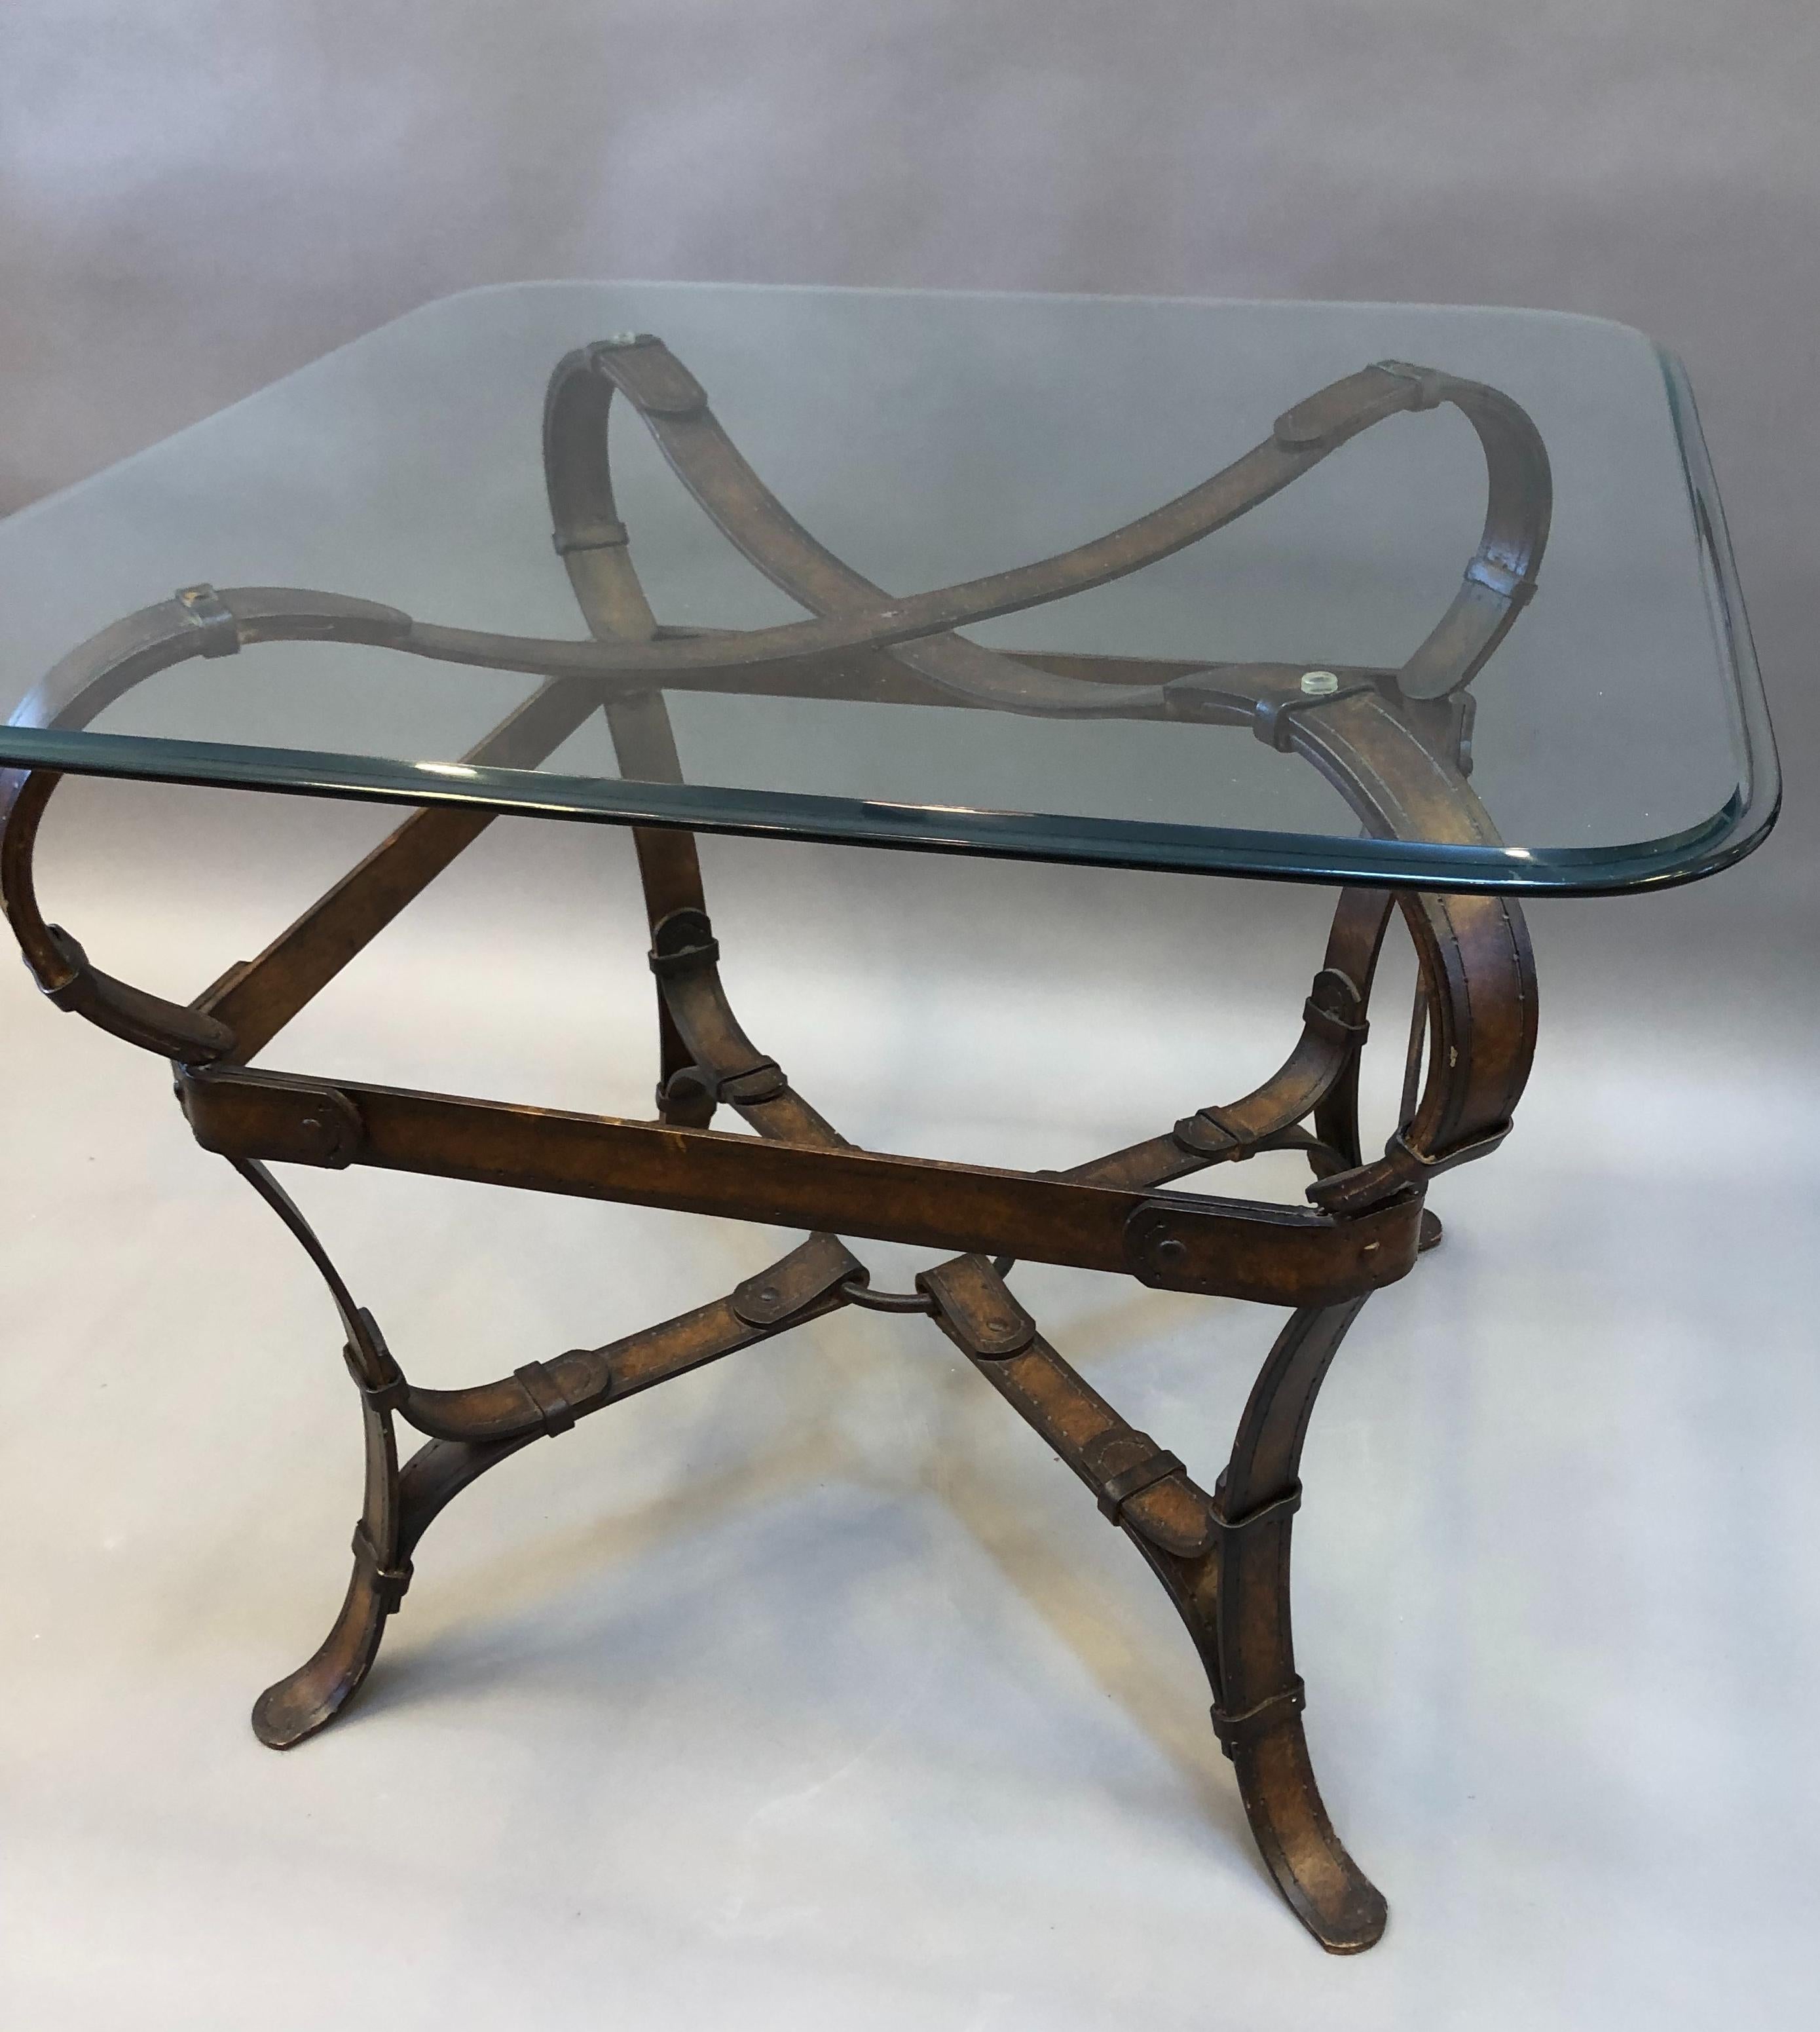 Extraordinary Equestrian style iron and glass side table with curving faux leather harness straps crafted as the main structure and a thick beveled glass top. 20th Century. Measures: 24” H 30” W 30” D 
2 available.
   